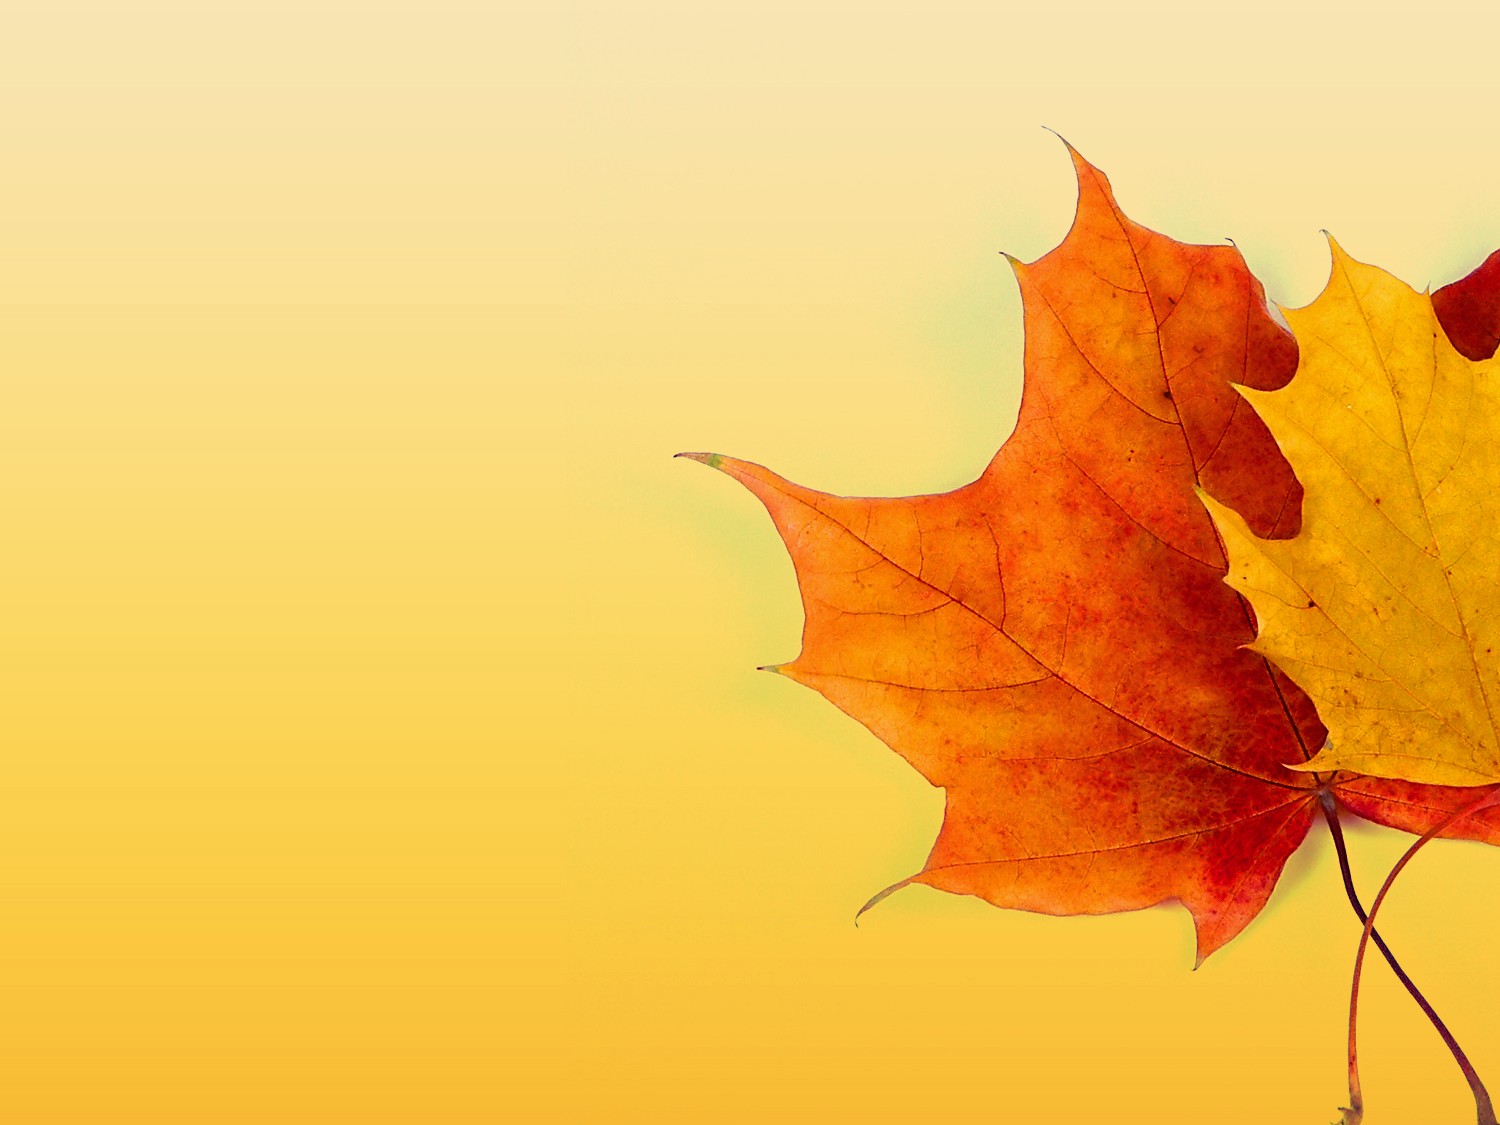 Autumn Frame Backgrounds for Powerpoint Templates - PPT Backgrounds Regarding Free Fall Powerpoint Templates